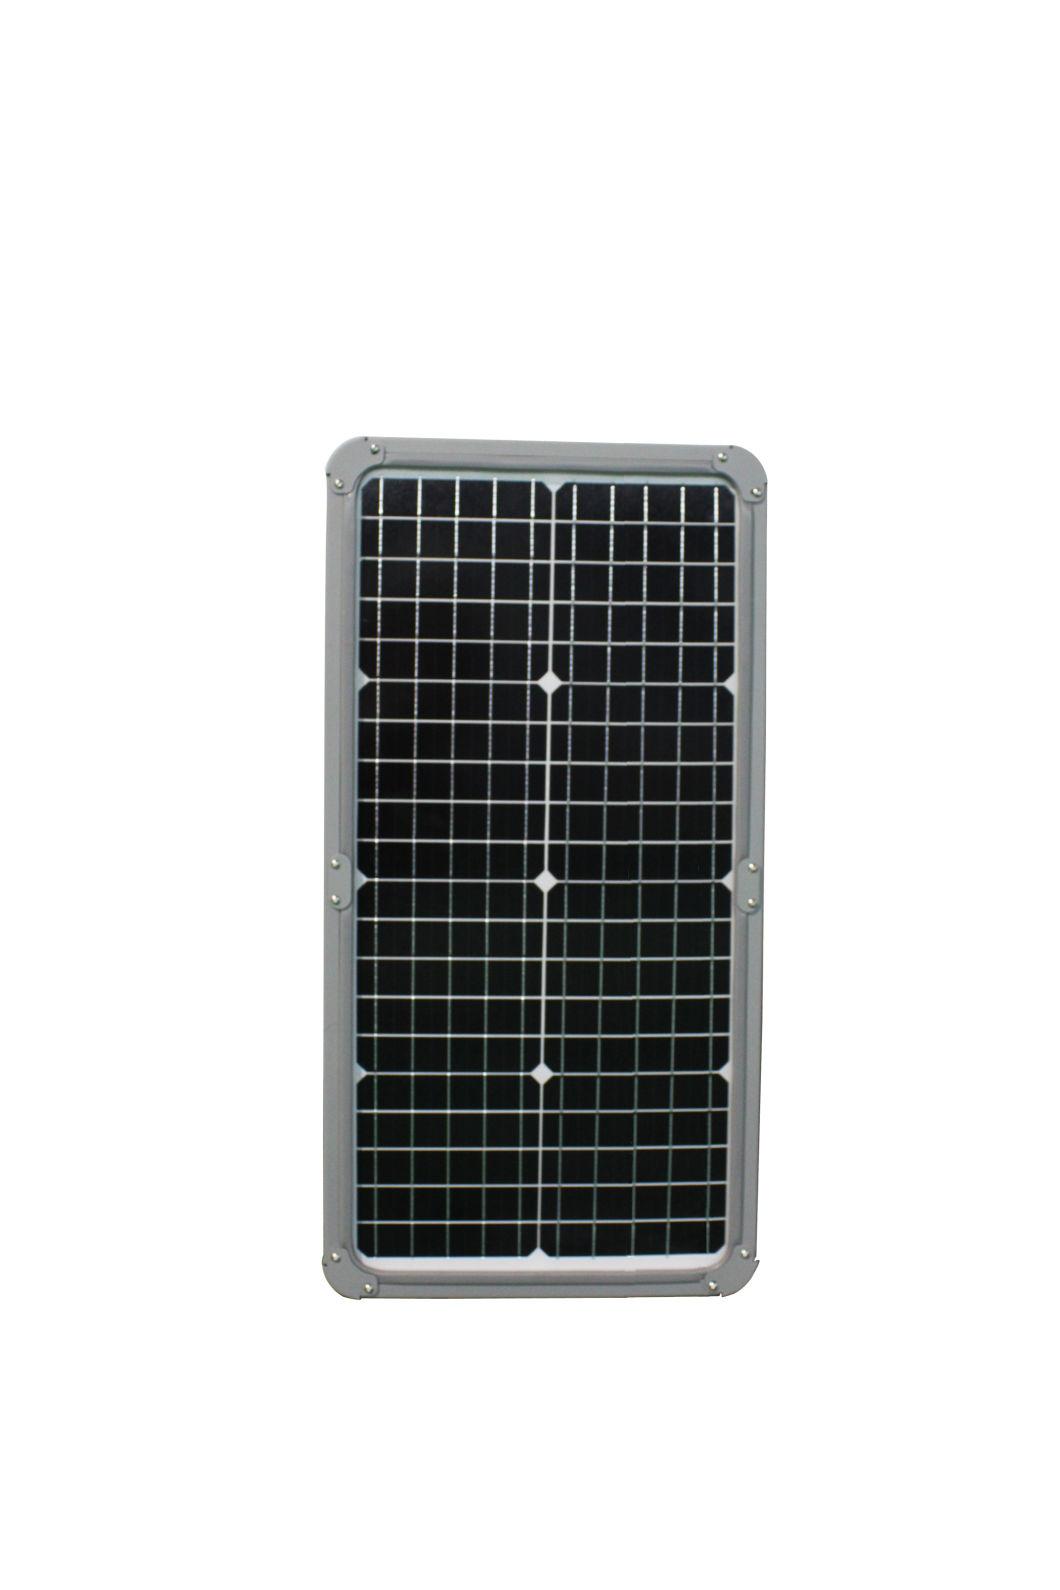 Integrated Road Industrial Outdoor Lamp Color Changing Energy Solar Power Street Light